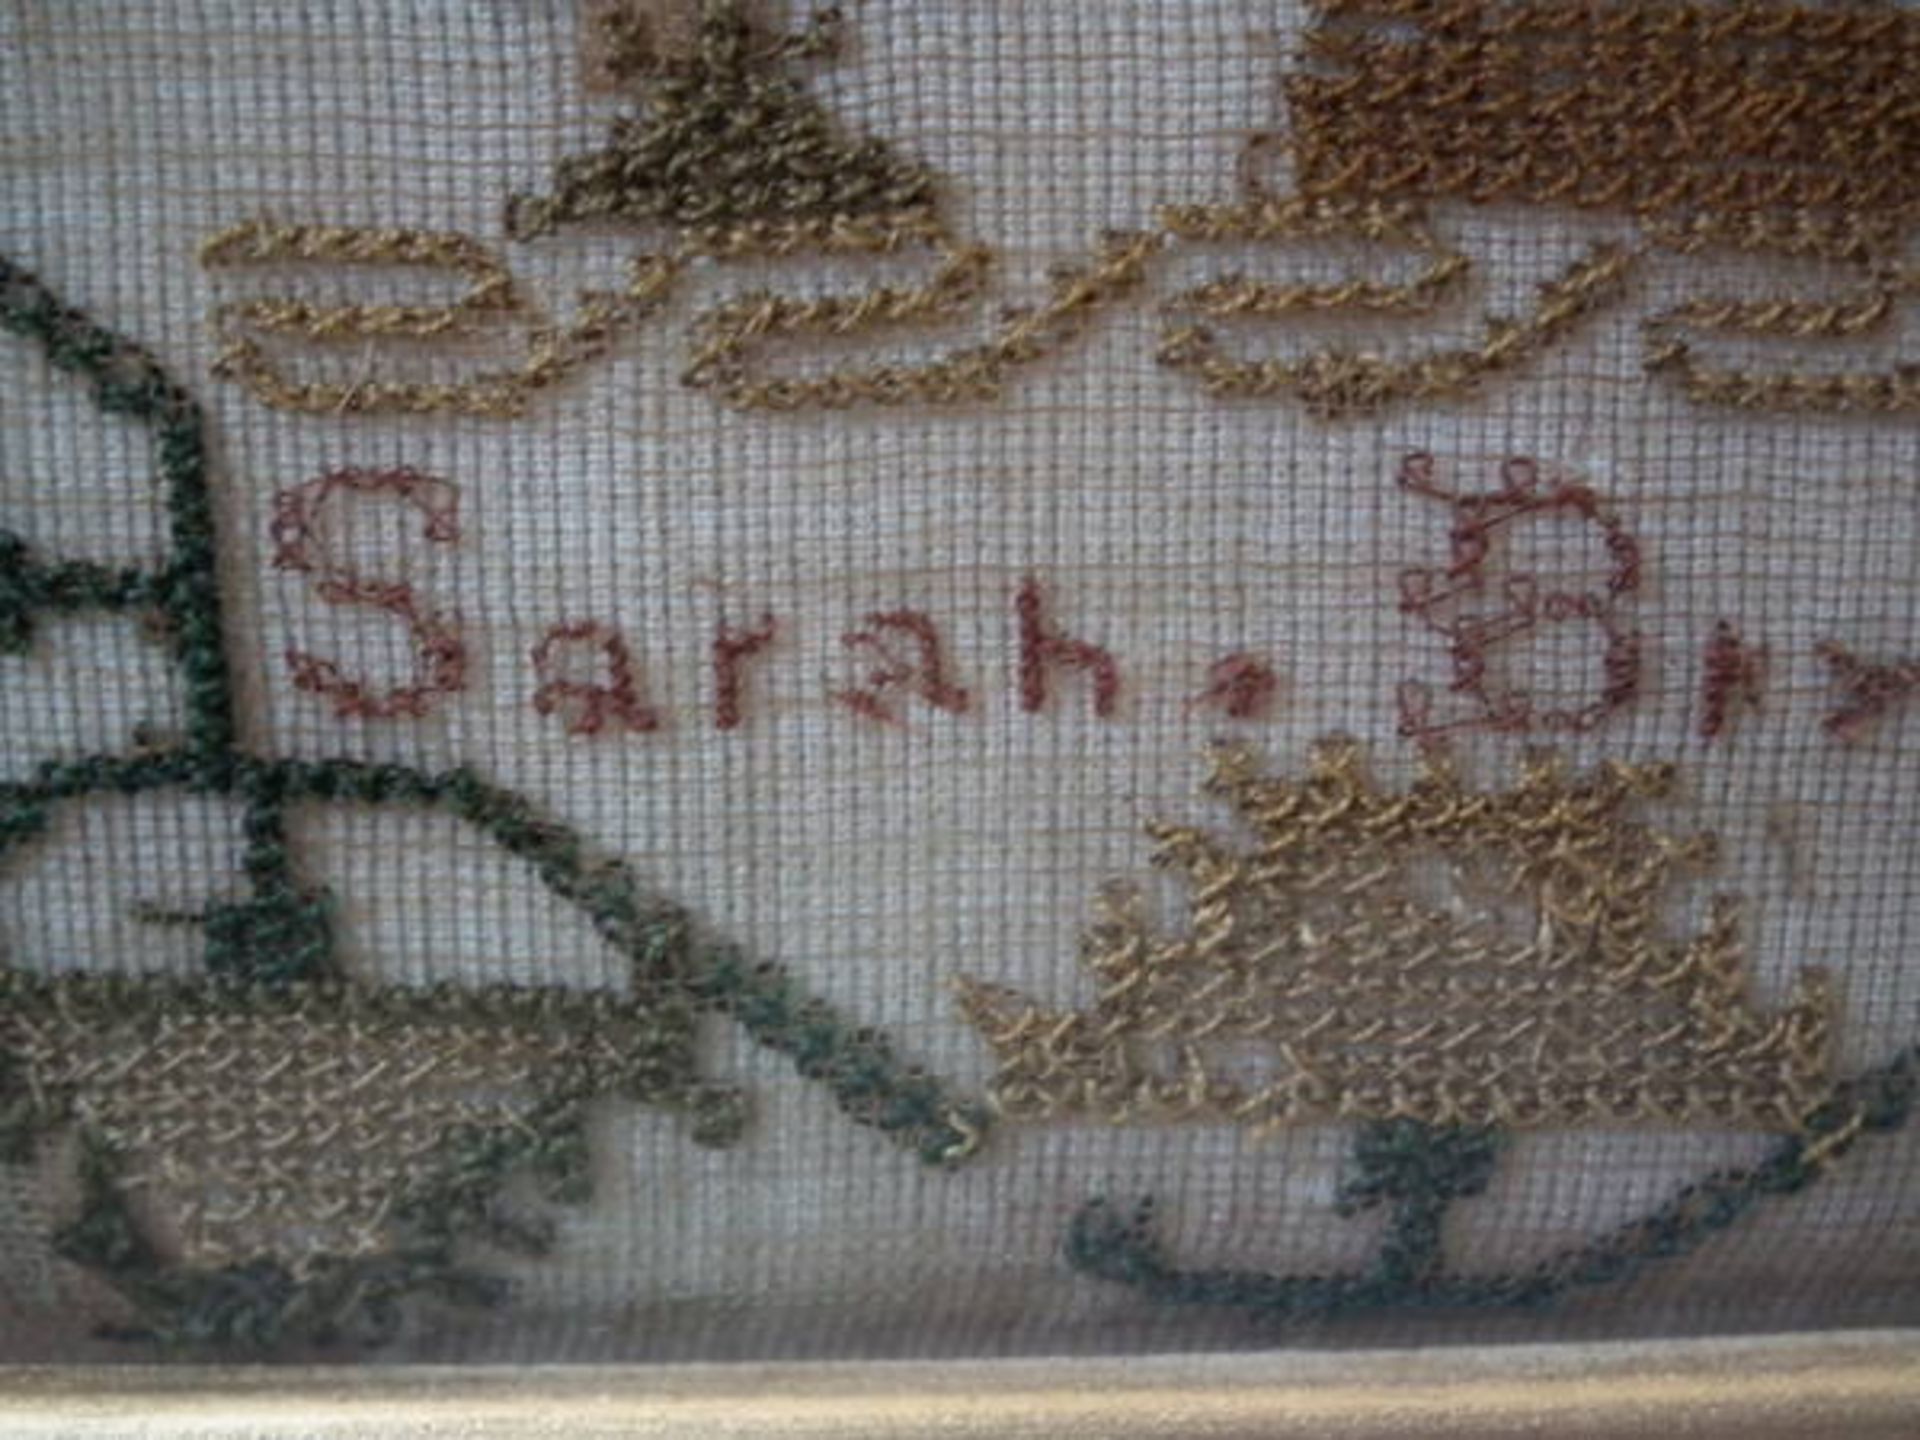 Needlework School Sampler dated 1843 by Sarah Bryan FREE UK DELIVERY - Image 33 of 38